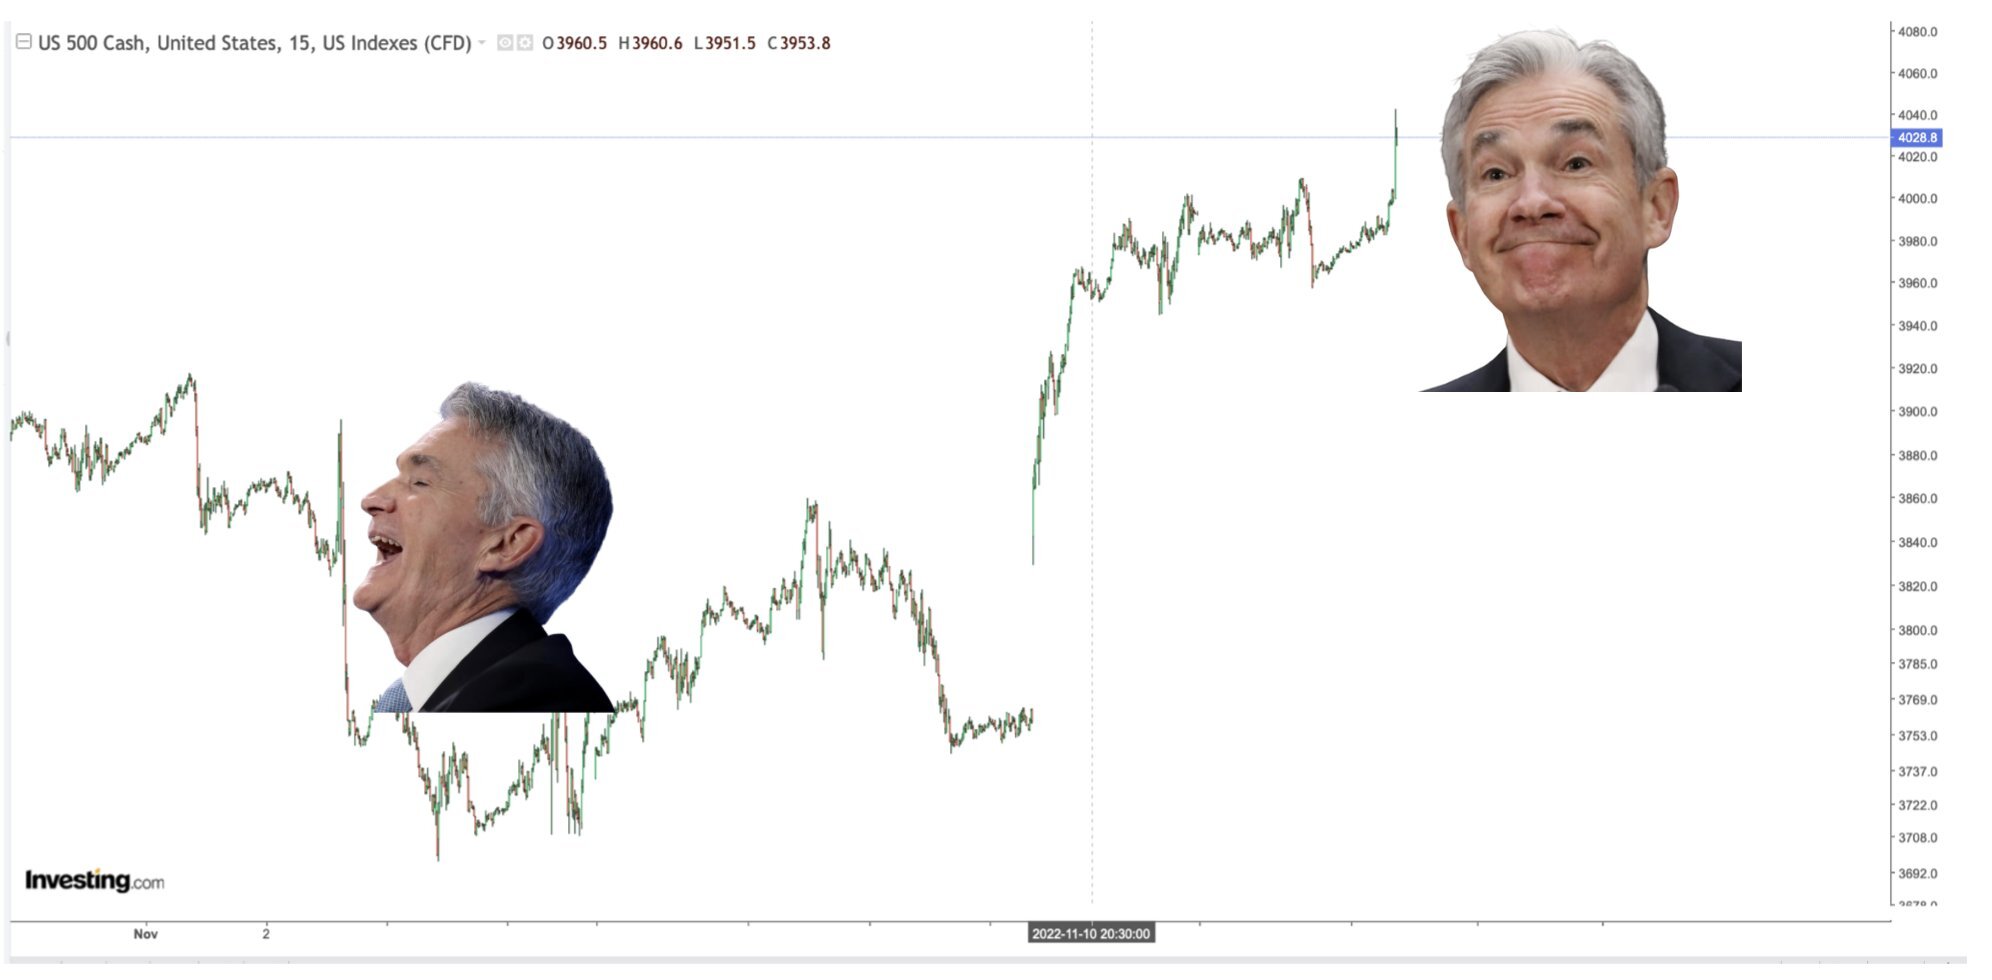 You can always count on Jerome Powell's facial expressions to generate a few laughs in the FinTwit community. (That's the S&P 500 chart incidentally.)